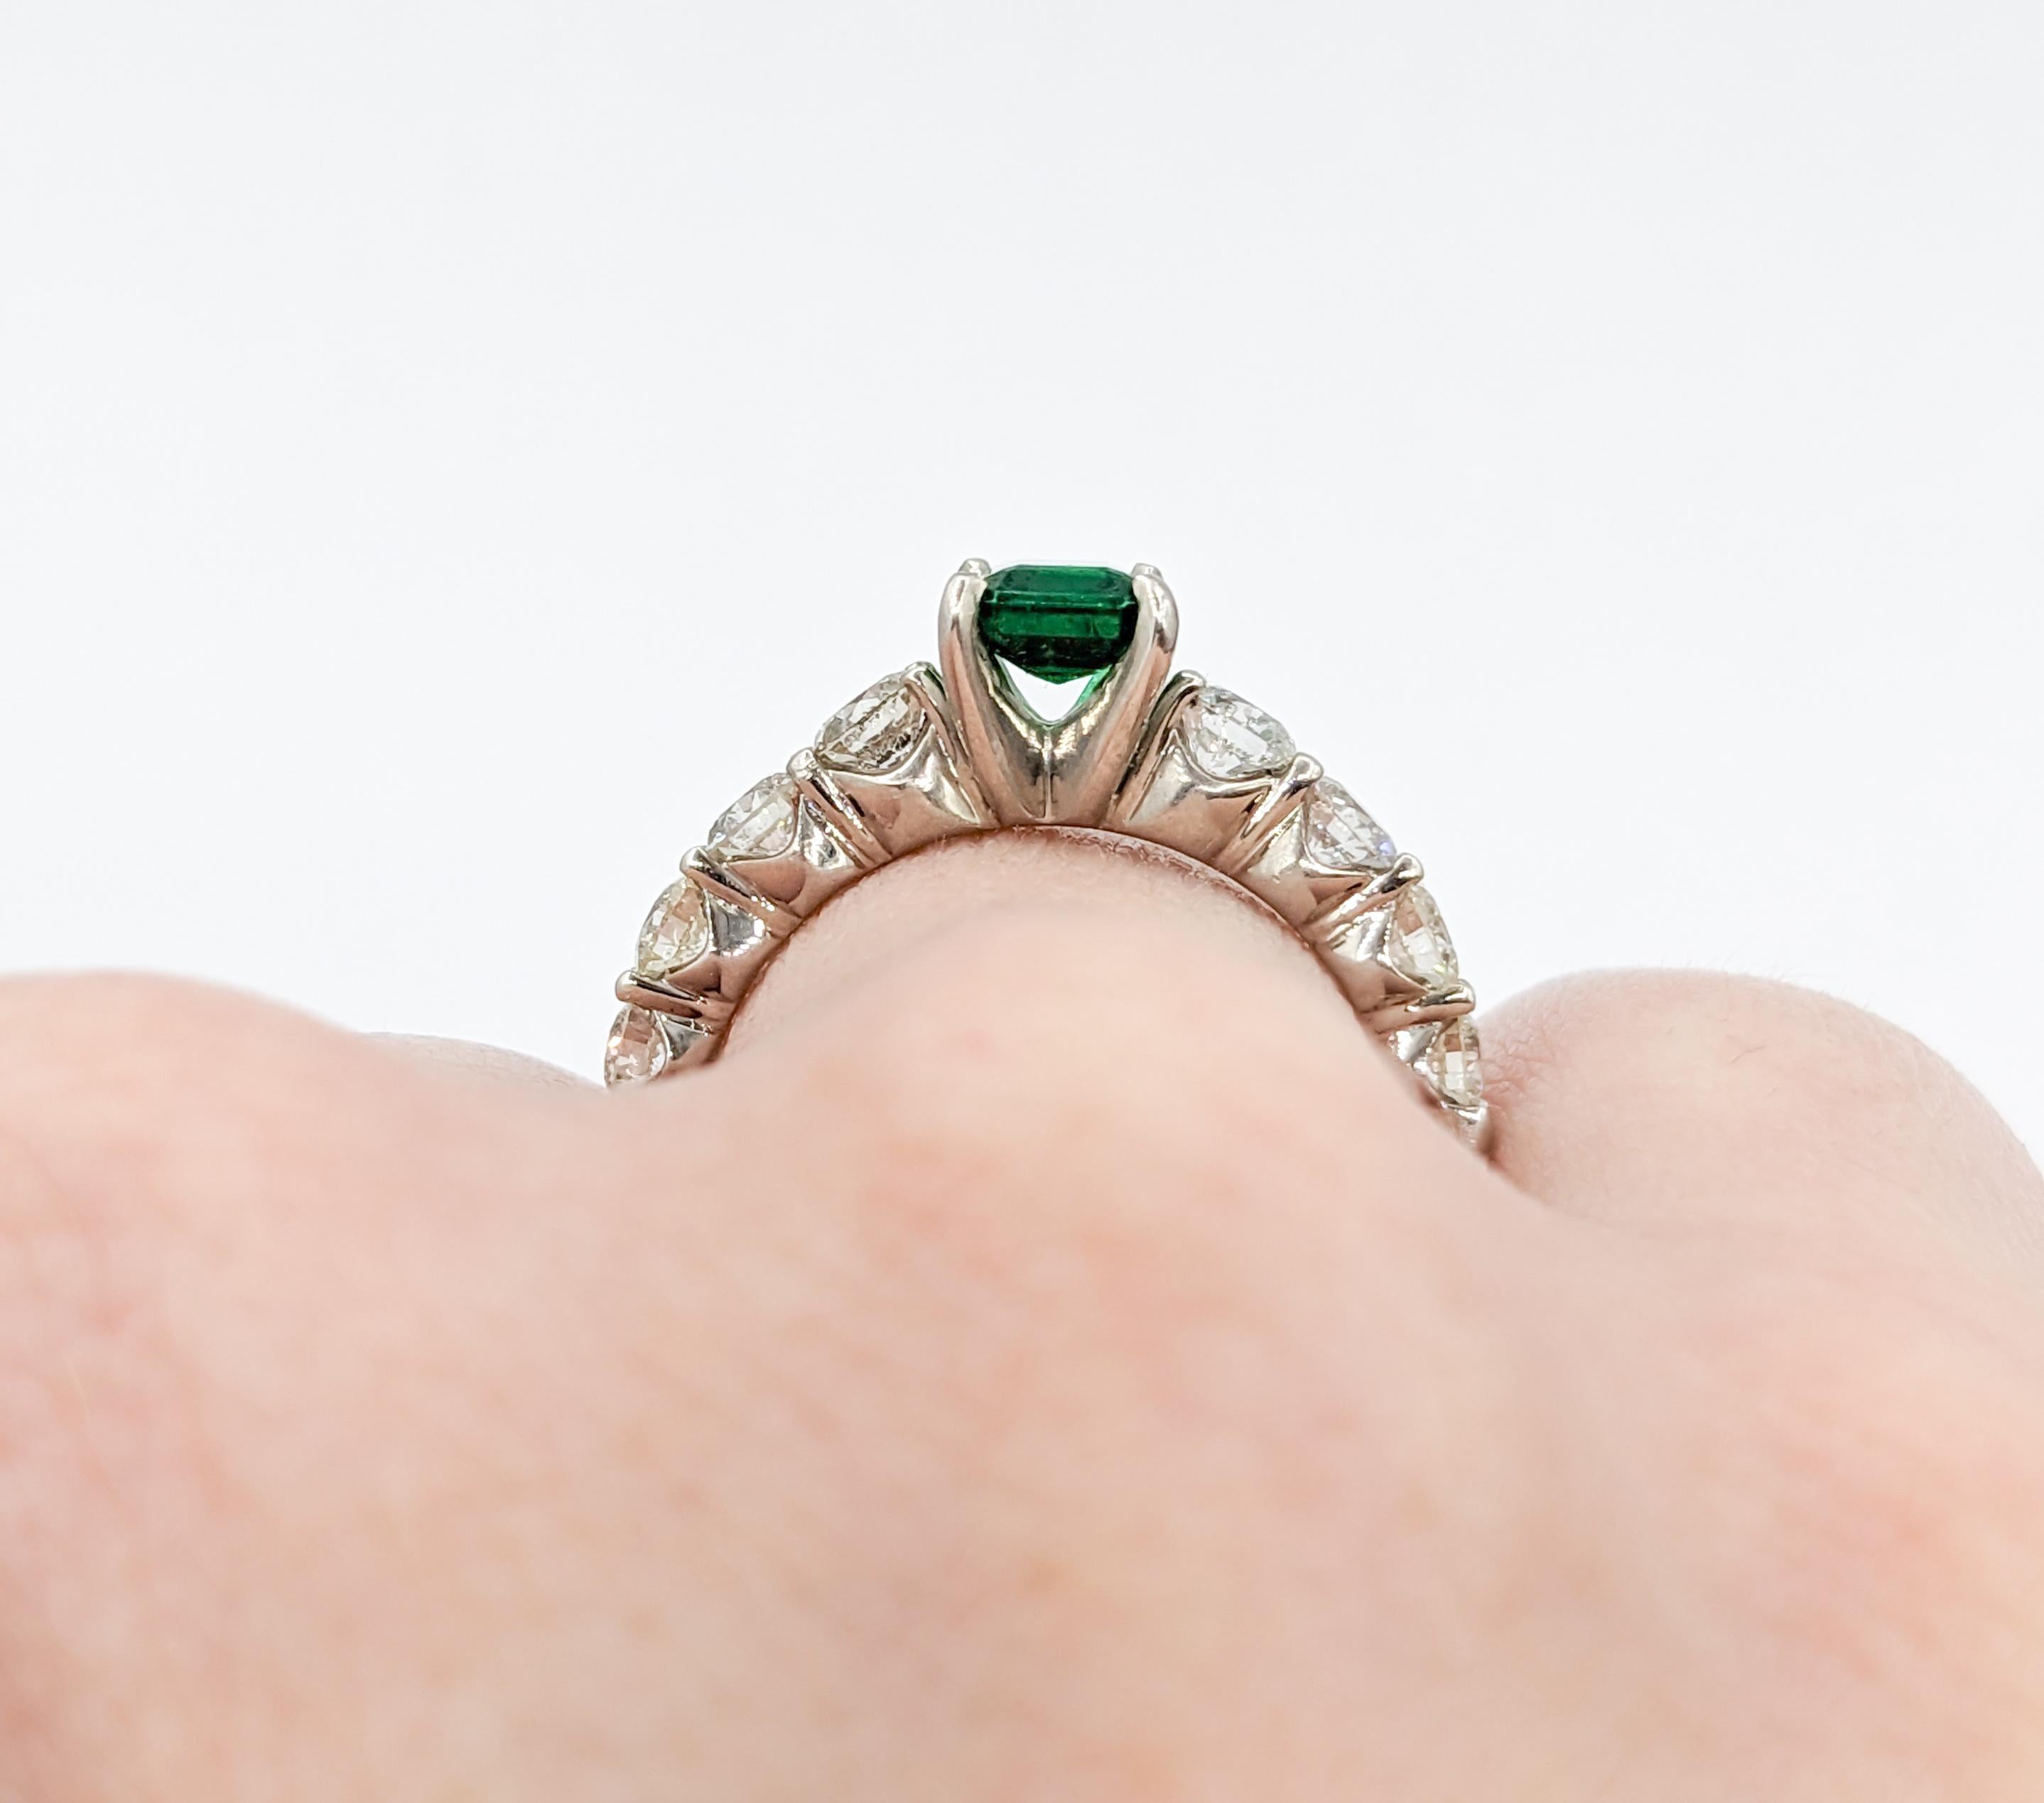 Stunning Emerald and Graduated Diamond Ring in 14K White Gold For Sale 2